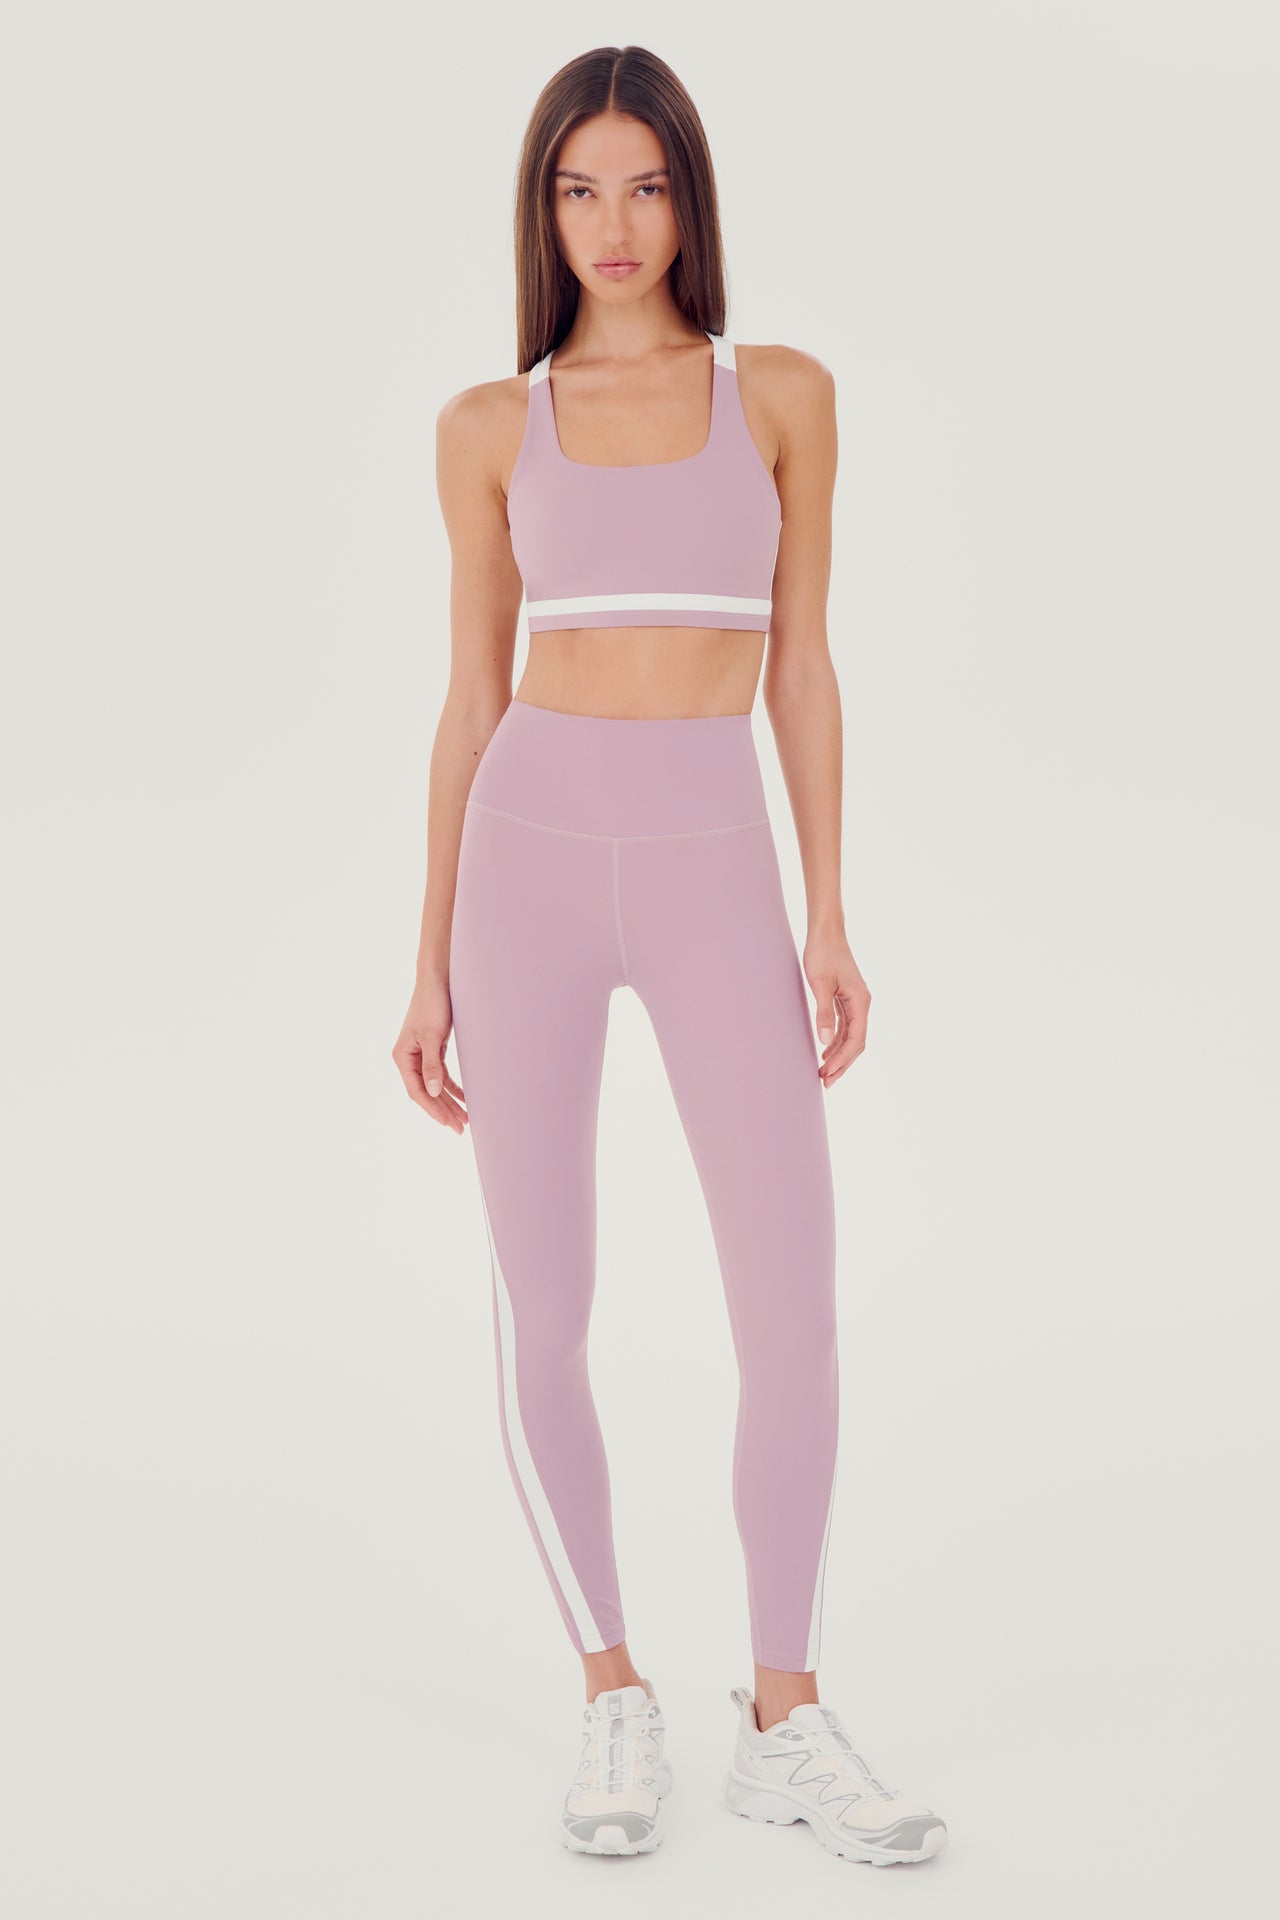 A woman wearing SPLITS59 Miles High Waist Rigor 7/8 - Blush/White sports bra and leggings, ready for her yoga session.